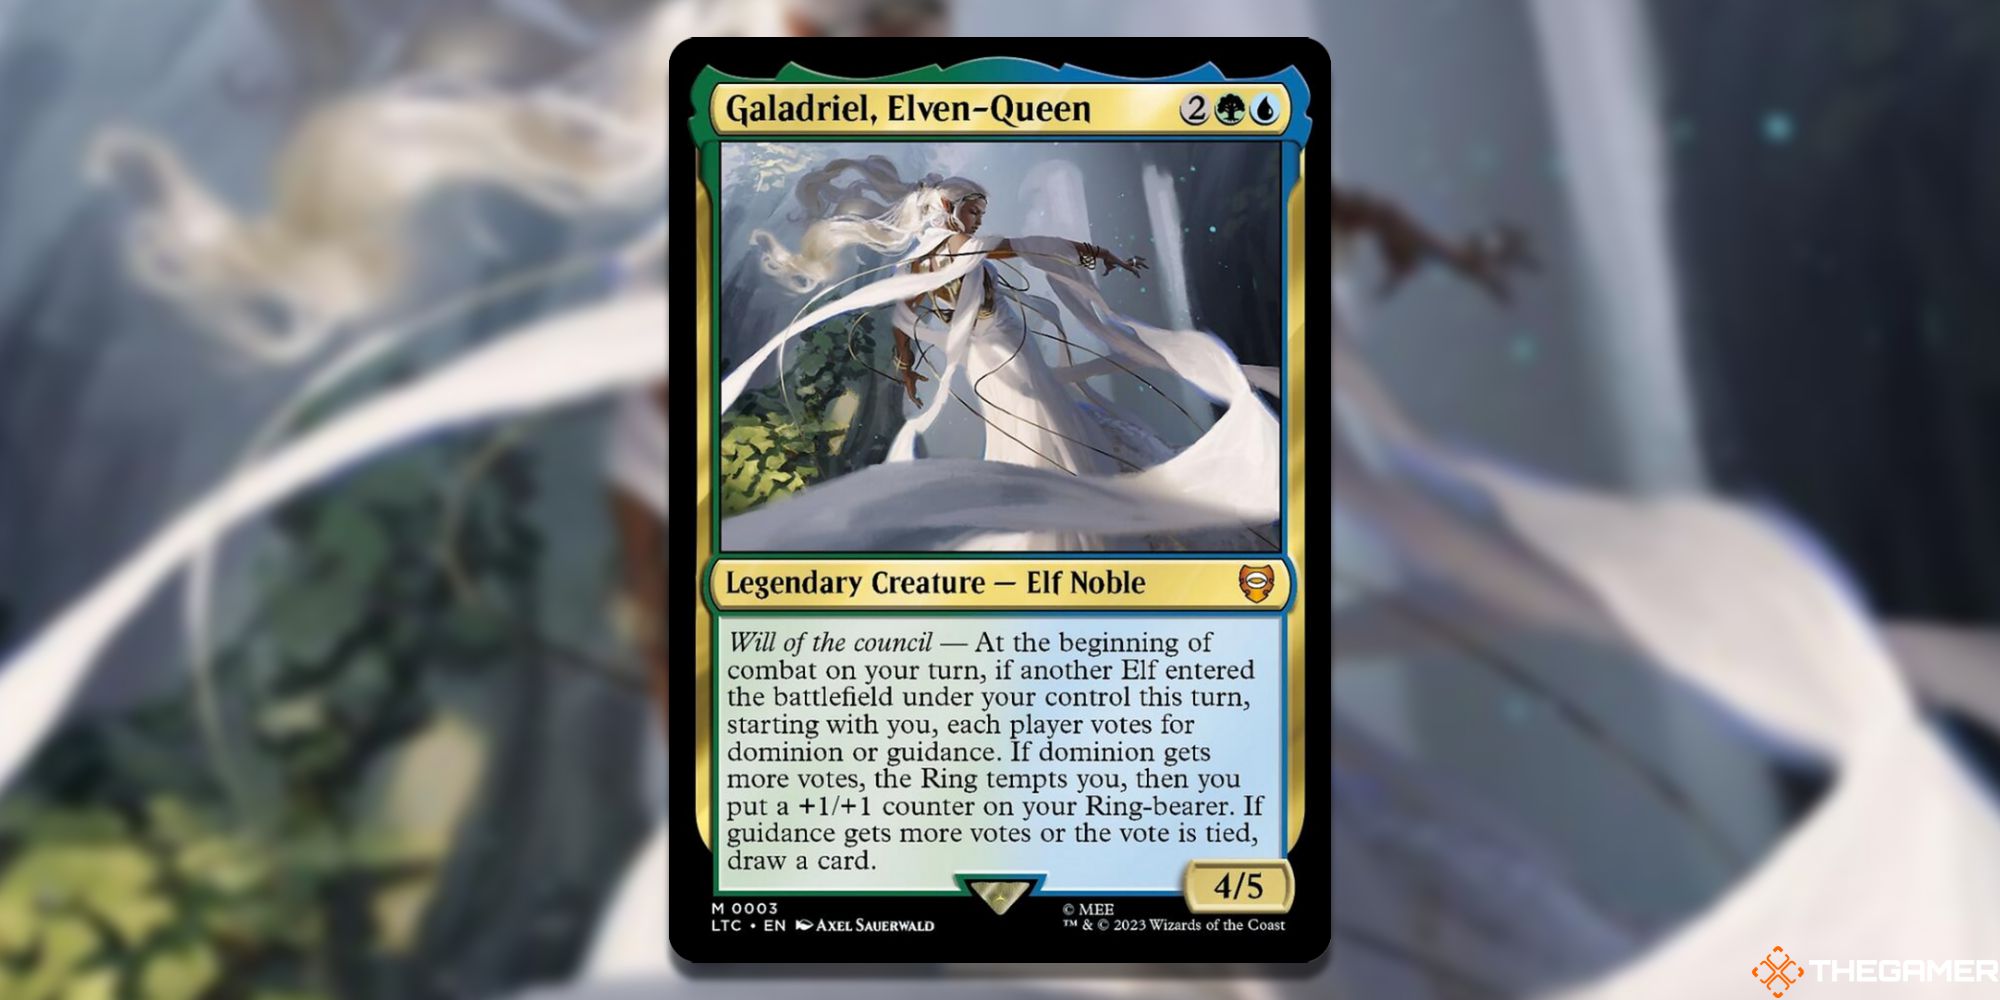 Image of the Galadriel, Elven-Queen card in Magic: The Gathering, with art by Axel Sauerwald